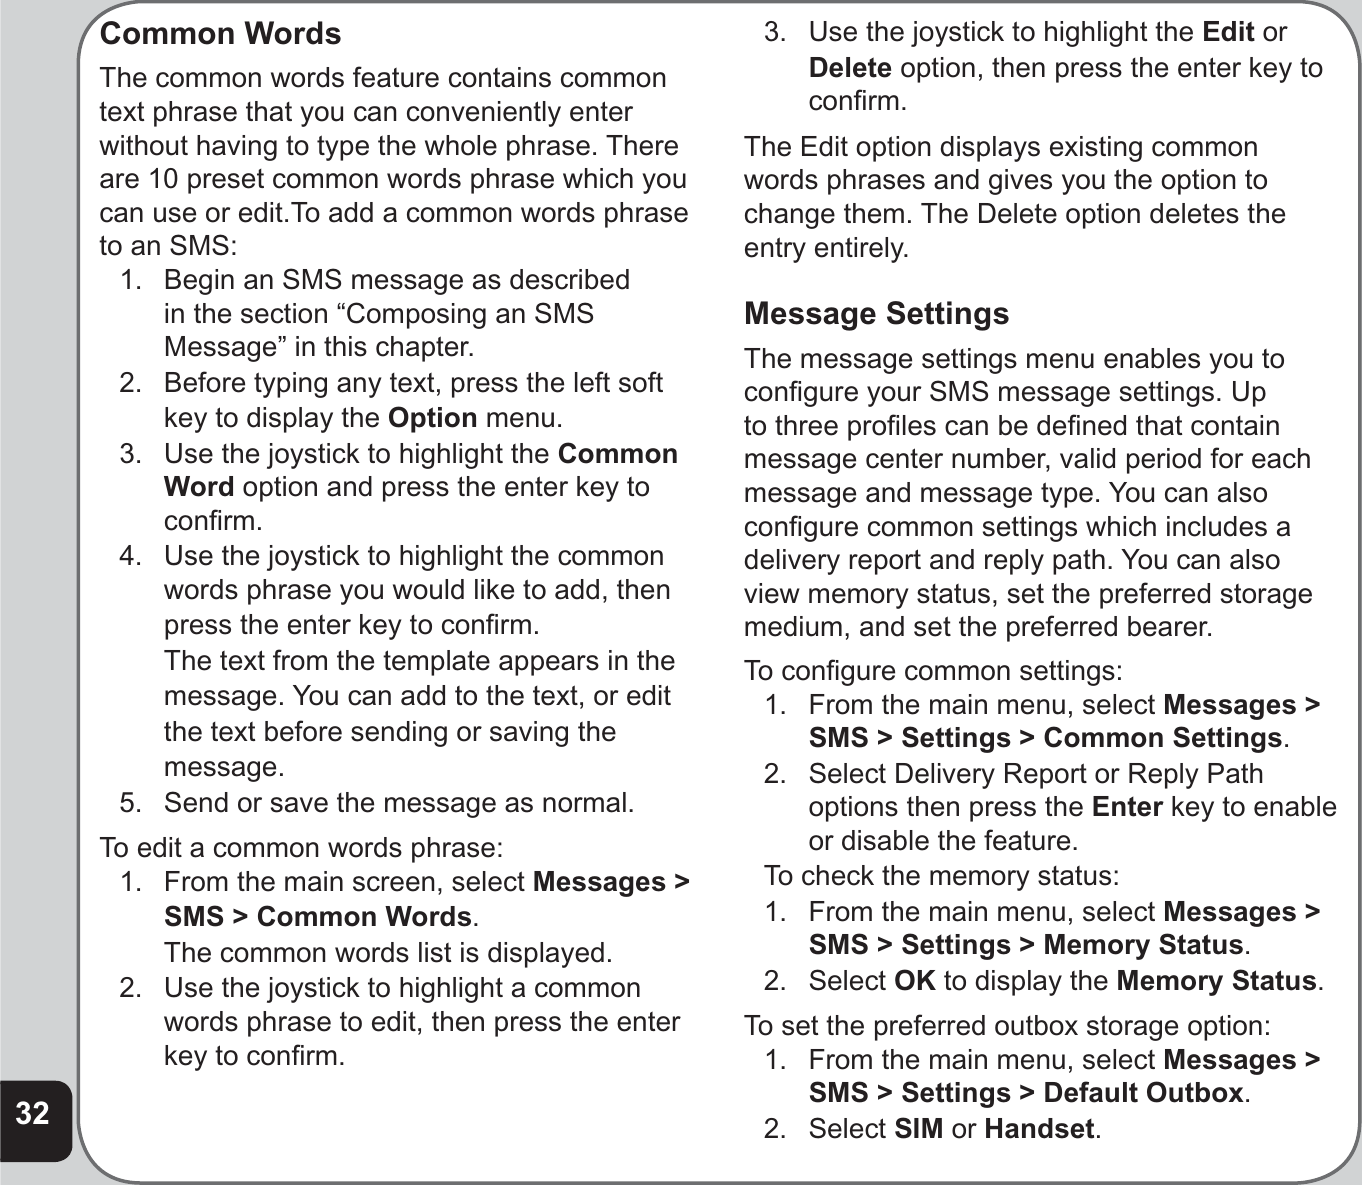 32Common WordsThe common words feature contains common text phrase that you can conveniently enter without having to type the whole phrase. There are 10 preset common words phrase which you can use or edit.To add a common words phrase to an SMS:1.   Begin an SMS message as described in the section “Composing an SMS Message” in this chapter.2.   Before typing any text, press the left soft  key to display the Option menu.3.   Use the joystick to highlight the CommonWord option and press the enter key to conﬁ rm.4.   Use the joystick to highlight the common words phrase you would like to add, then  press the enter key to conﬁ rm.  The text from the template appears in the  message. You can add to the text, or edit  the text before sending or saving the message.5.   Send or save the message as normal. To edit a common words phrase:1.   From the main screen, select Messages &gt; SMS &gt; Common Words.  The common words list is displayed.2.   Use the joystick to highlight a common words phrase to edit, then press the enter key to conﬁ rm.3.   Use the joystick to highlight the Edit or Delete option, then press the enter key to conﬁ rm.The Edit option displays existing common words phrases and gives you the option to change them. The Delete option deletes the entry entirely.Message SettingsThe message settings menu enables you to conﬁ gure your SMS message settings. Up to three proﬁ les can be deﬁ ned that contain message center number, valid period for each message and message type. You can also conﬁ gure common settings which includes a delivery report and reply path. You can also view memory status, set the preferred storage medium, and set the preferred bearer.To conﬁ gure common settings:1.  From the main menu, select Messages &gt; SMS &gt; Settings &gt; Common Settings.2.  Select Delivery Report or Reply Path options then press the Enter key to enable or disable the feature.To check the memory status:1.  From the main menu, select Messages &gt; SMS &gt; Settings &gt; Memory Status.2. Select OK to display the Memory Status.To set the preferred outbox storage option:1.  From the main menu, select Messages &gt; SMS &gt; Settings &gt; Default Outbox.2. Select SIM or Handset.